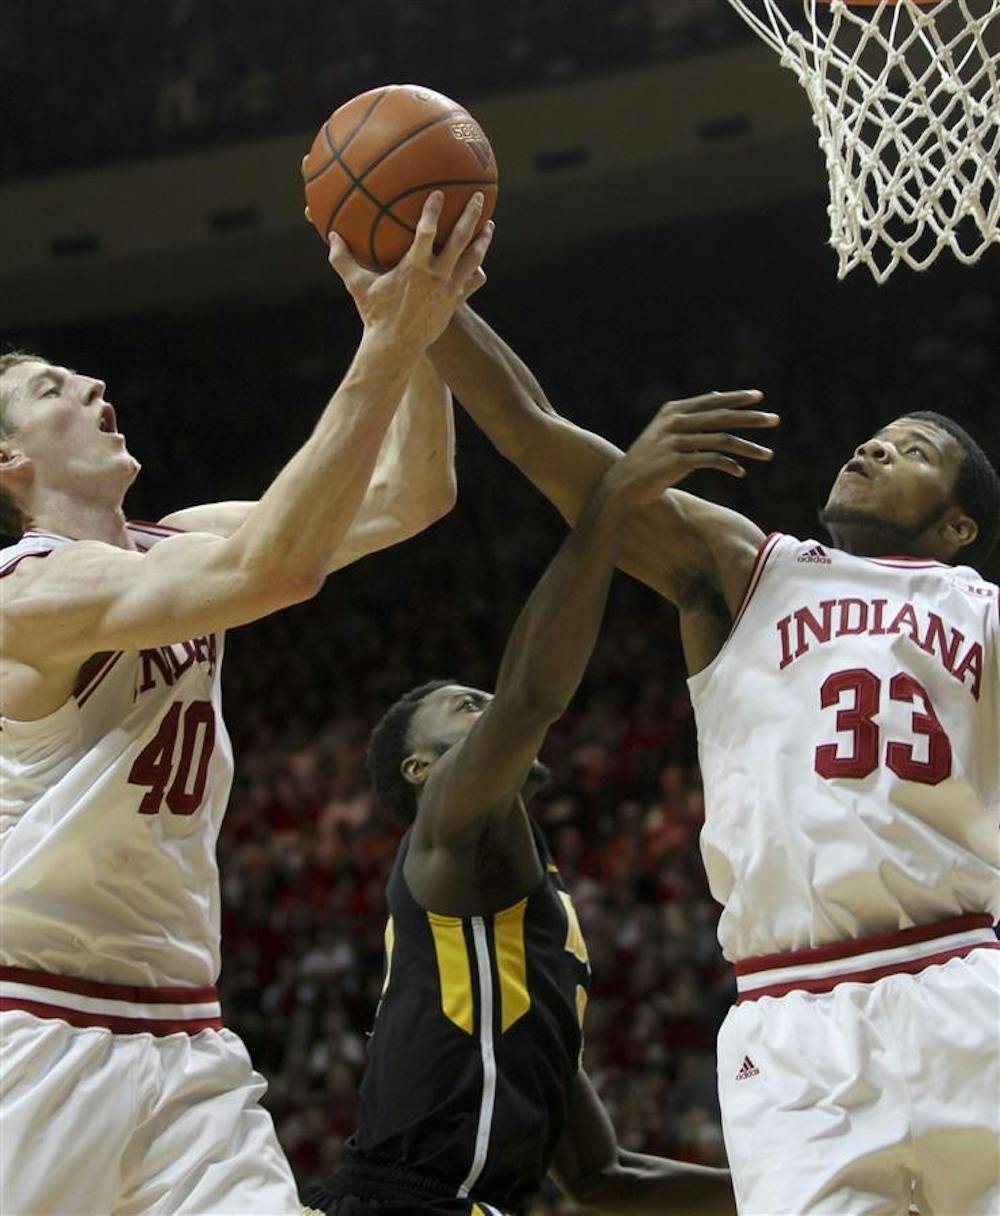 Both sophomore Cody Zeller and freshman Jeremy Hollowell reach for a layup Saturday during the Hoosier's 73-60 win against Iowa in Assembly Hall.